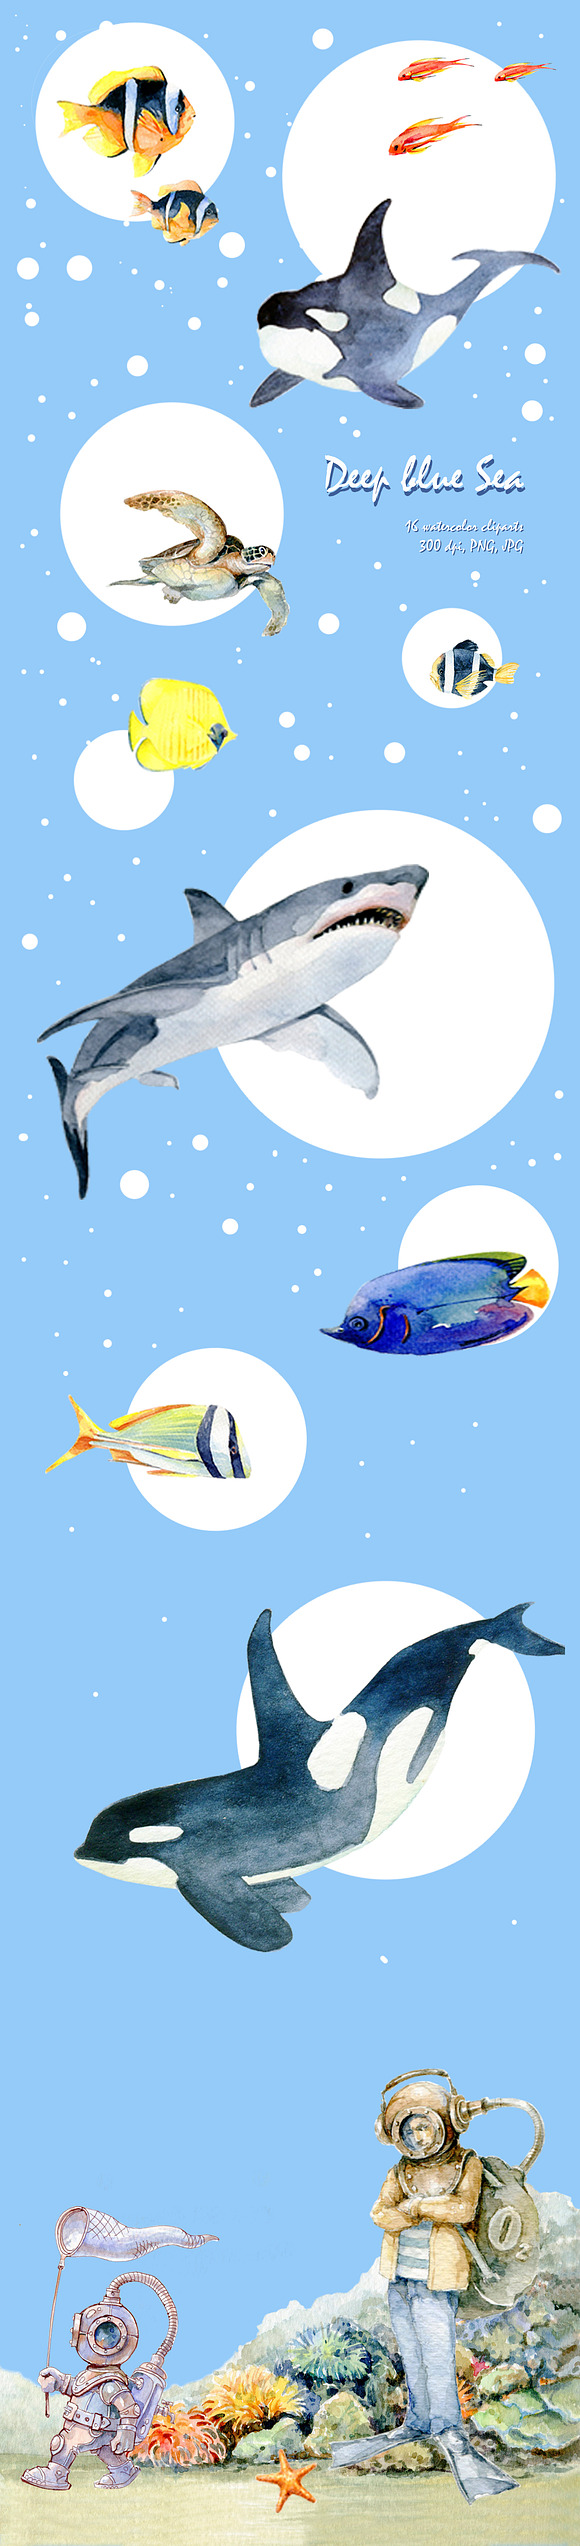 Deep Blue Sea in Illustrations - product preview 1